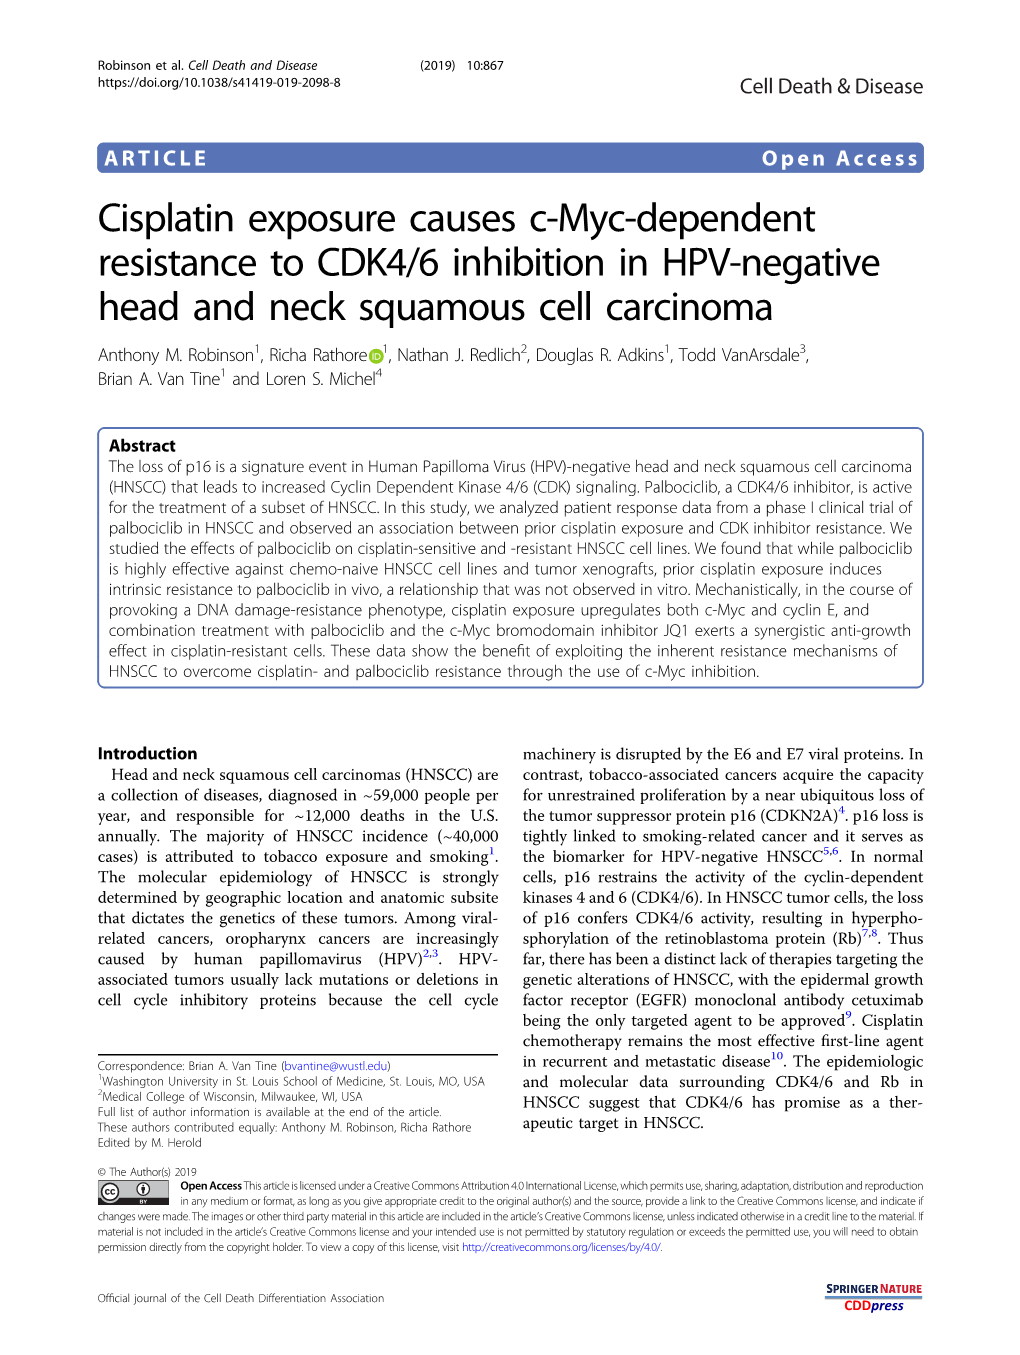 Cisplatin Exposure Causes C-Myc-Dependent Resistance to CDK4/6 Inhibition in HPV-Negative Head and Neck Squamous Cell Carcinoma Anthony M